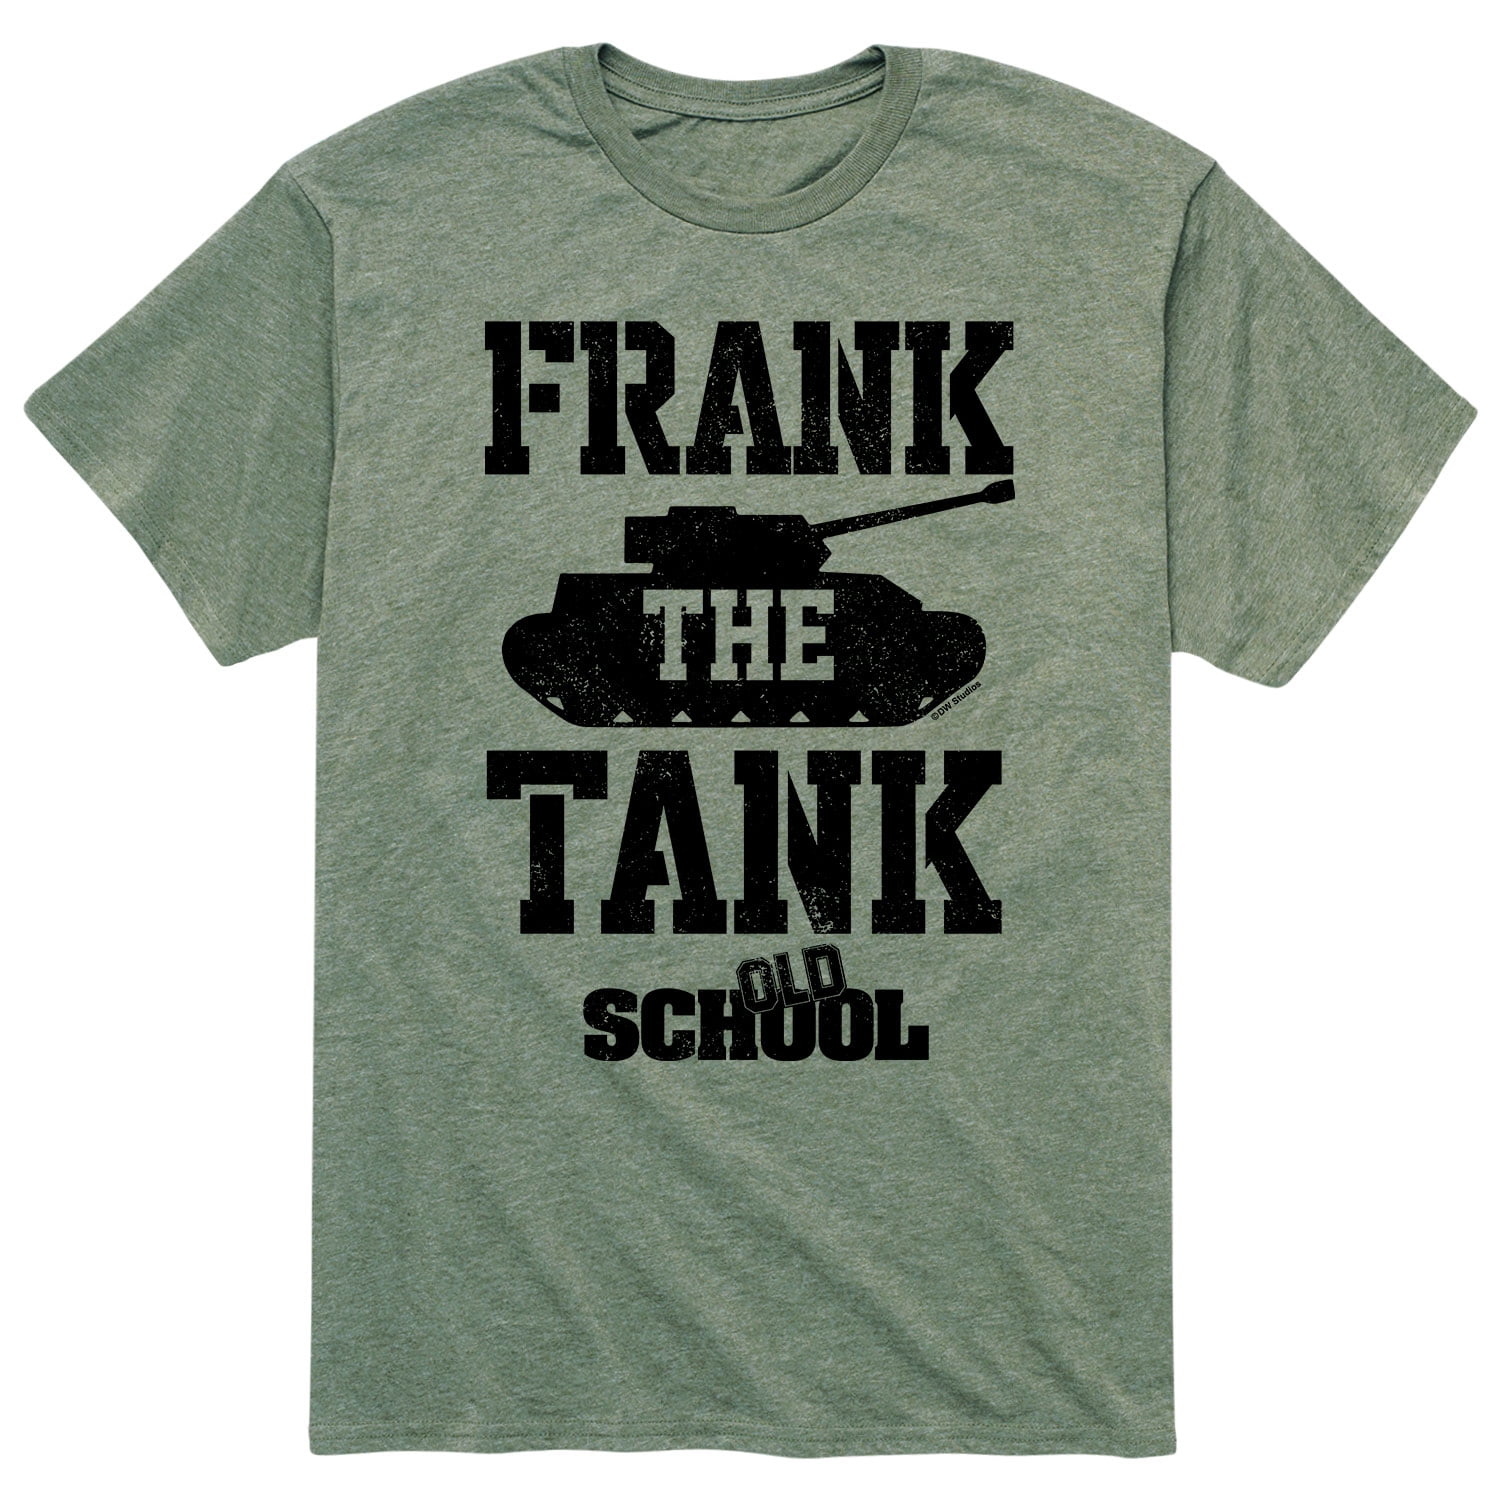 Frank the Tank T-shirt Old School Movie 5 Colors S-3XL